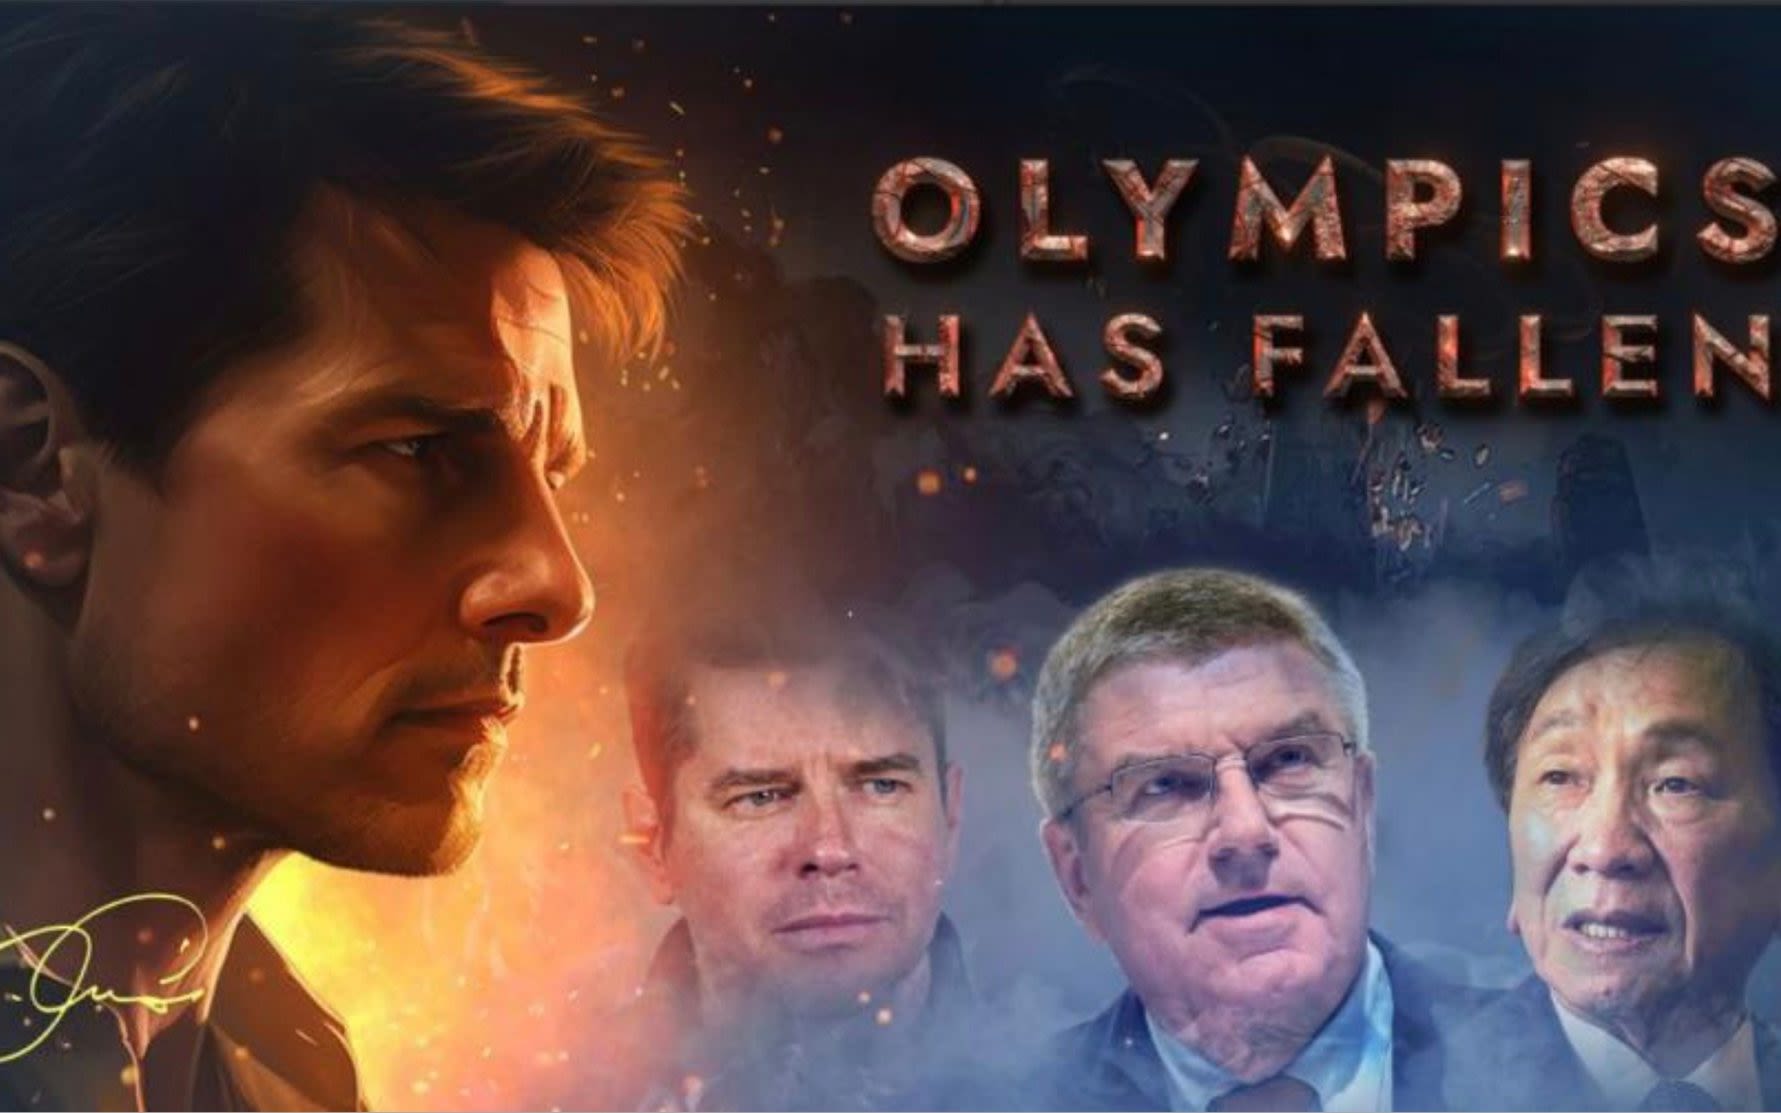 Fake Tom Cruise warns of violence at Olympics in Russian documentary about corruption at the Games